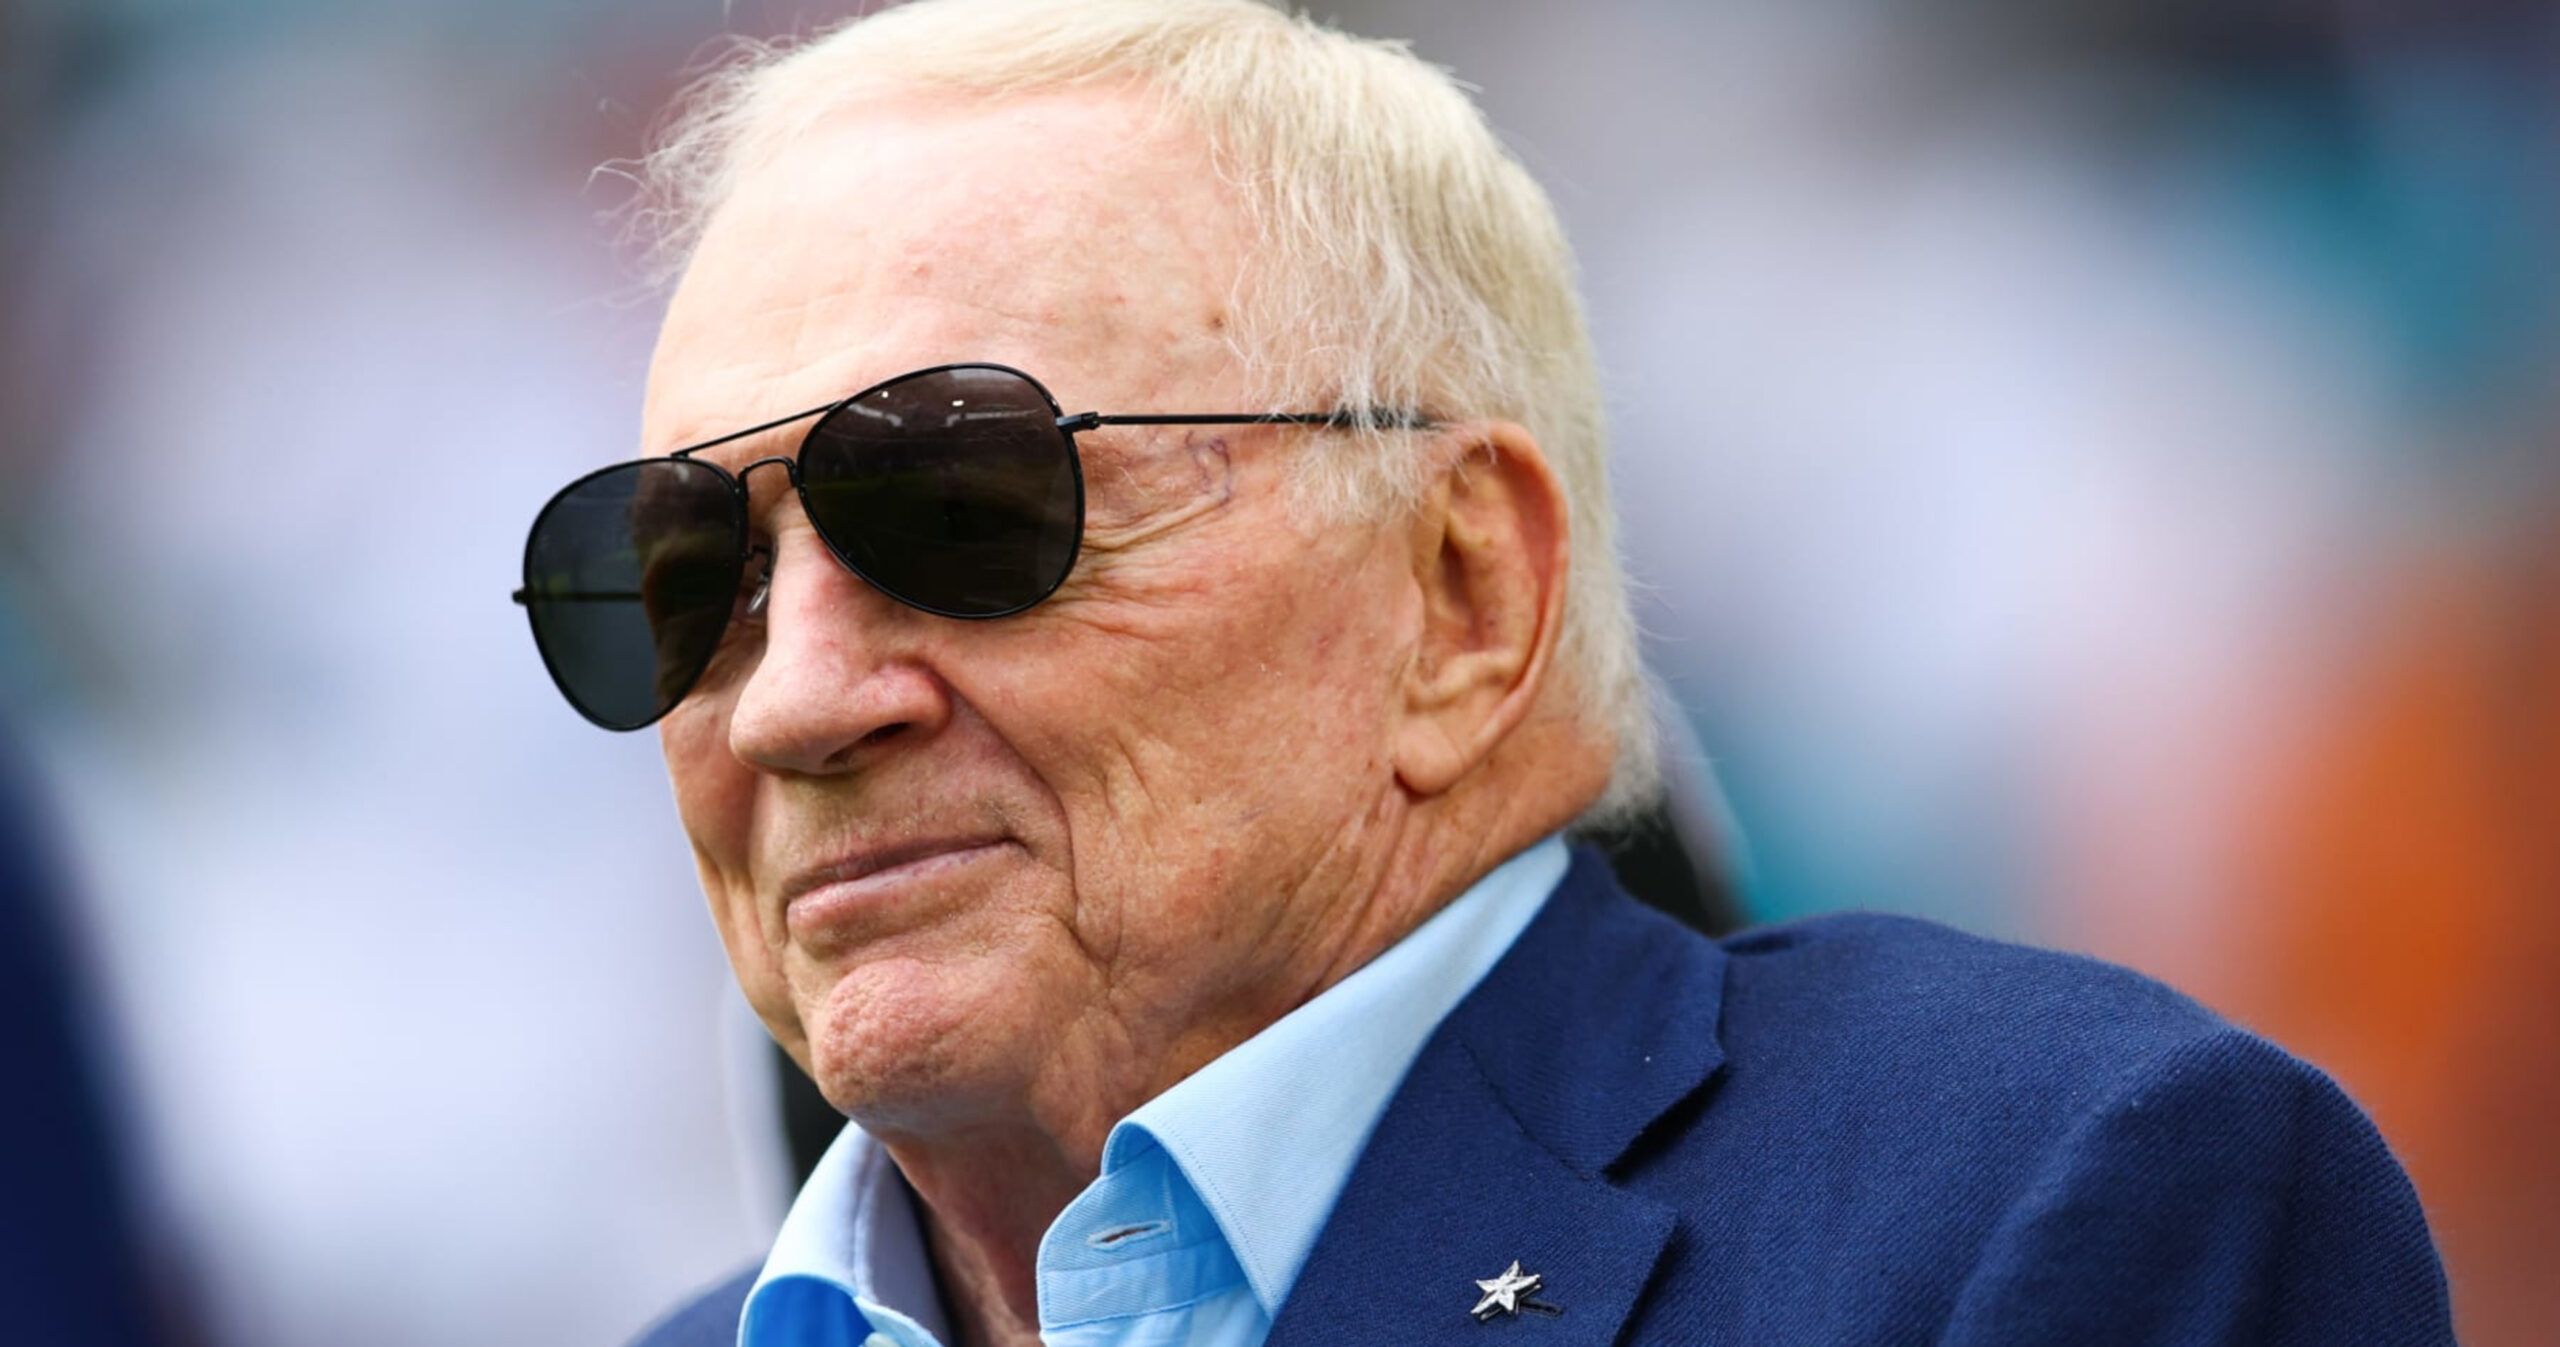 Cowboys’ Jerry Jones ‘Fully’ Expects NFL to Alternate Rule to Ban Hip-Tumble Tackles